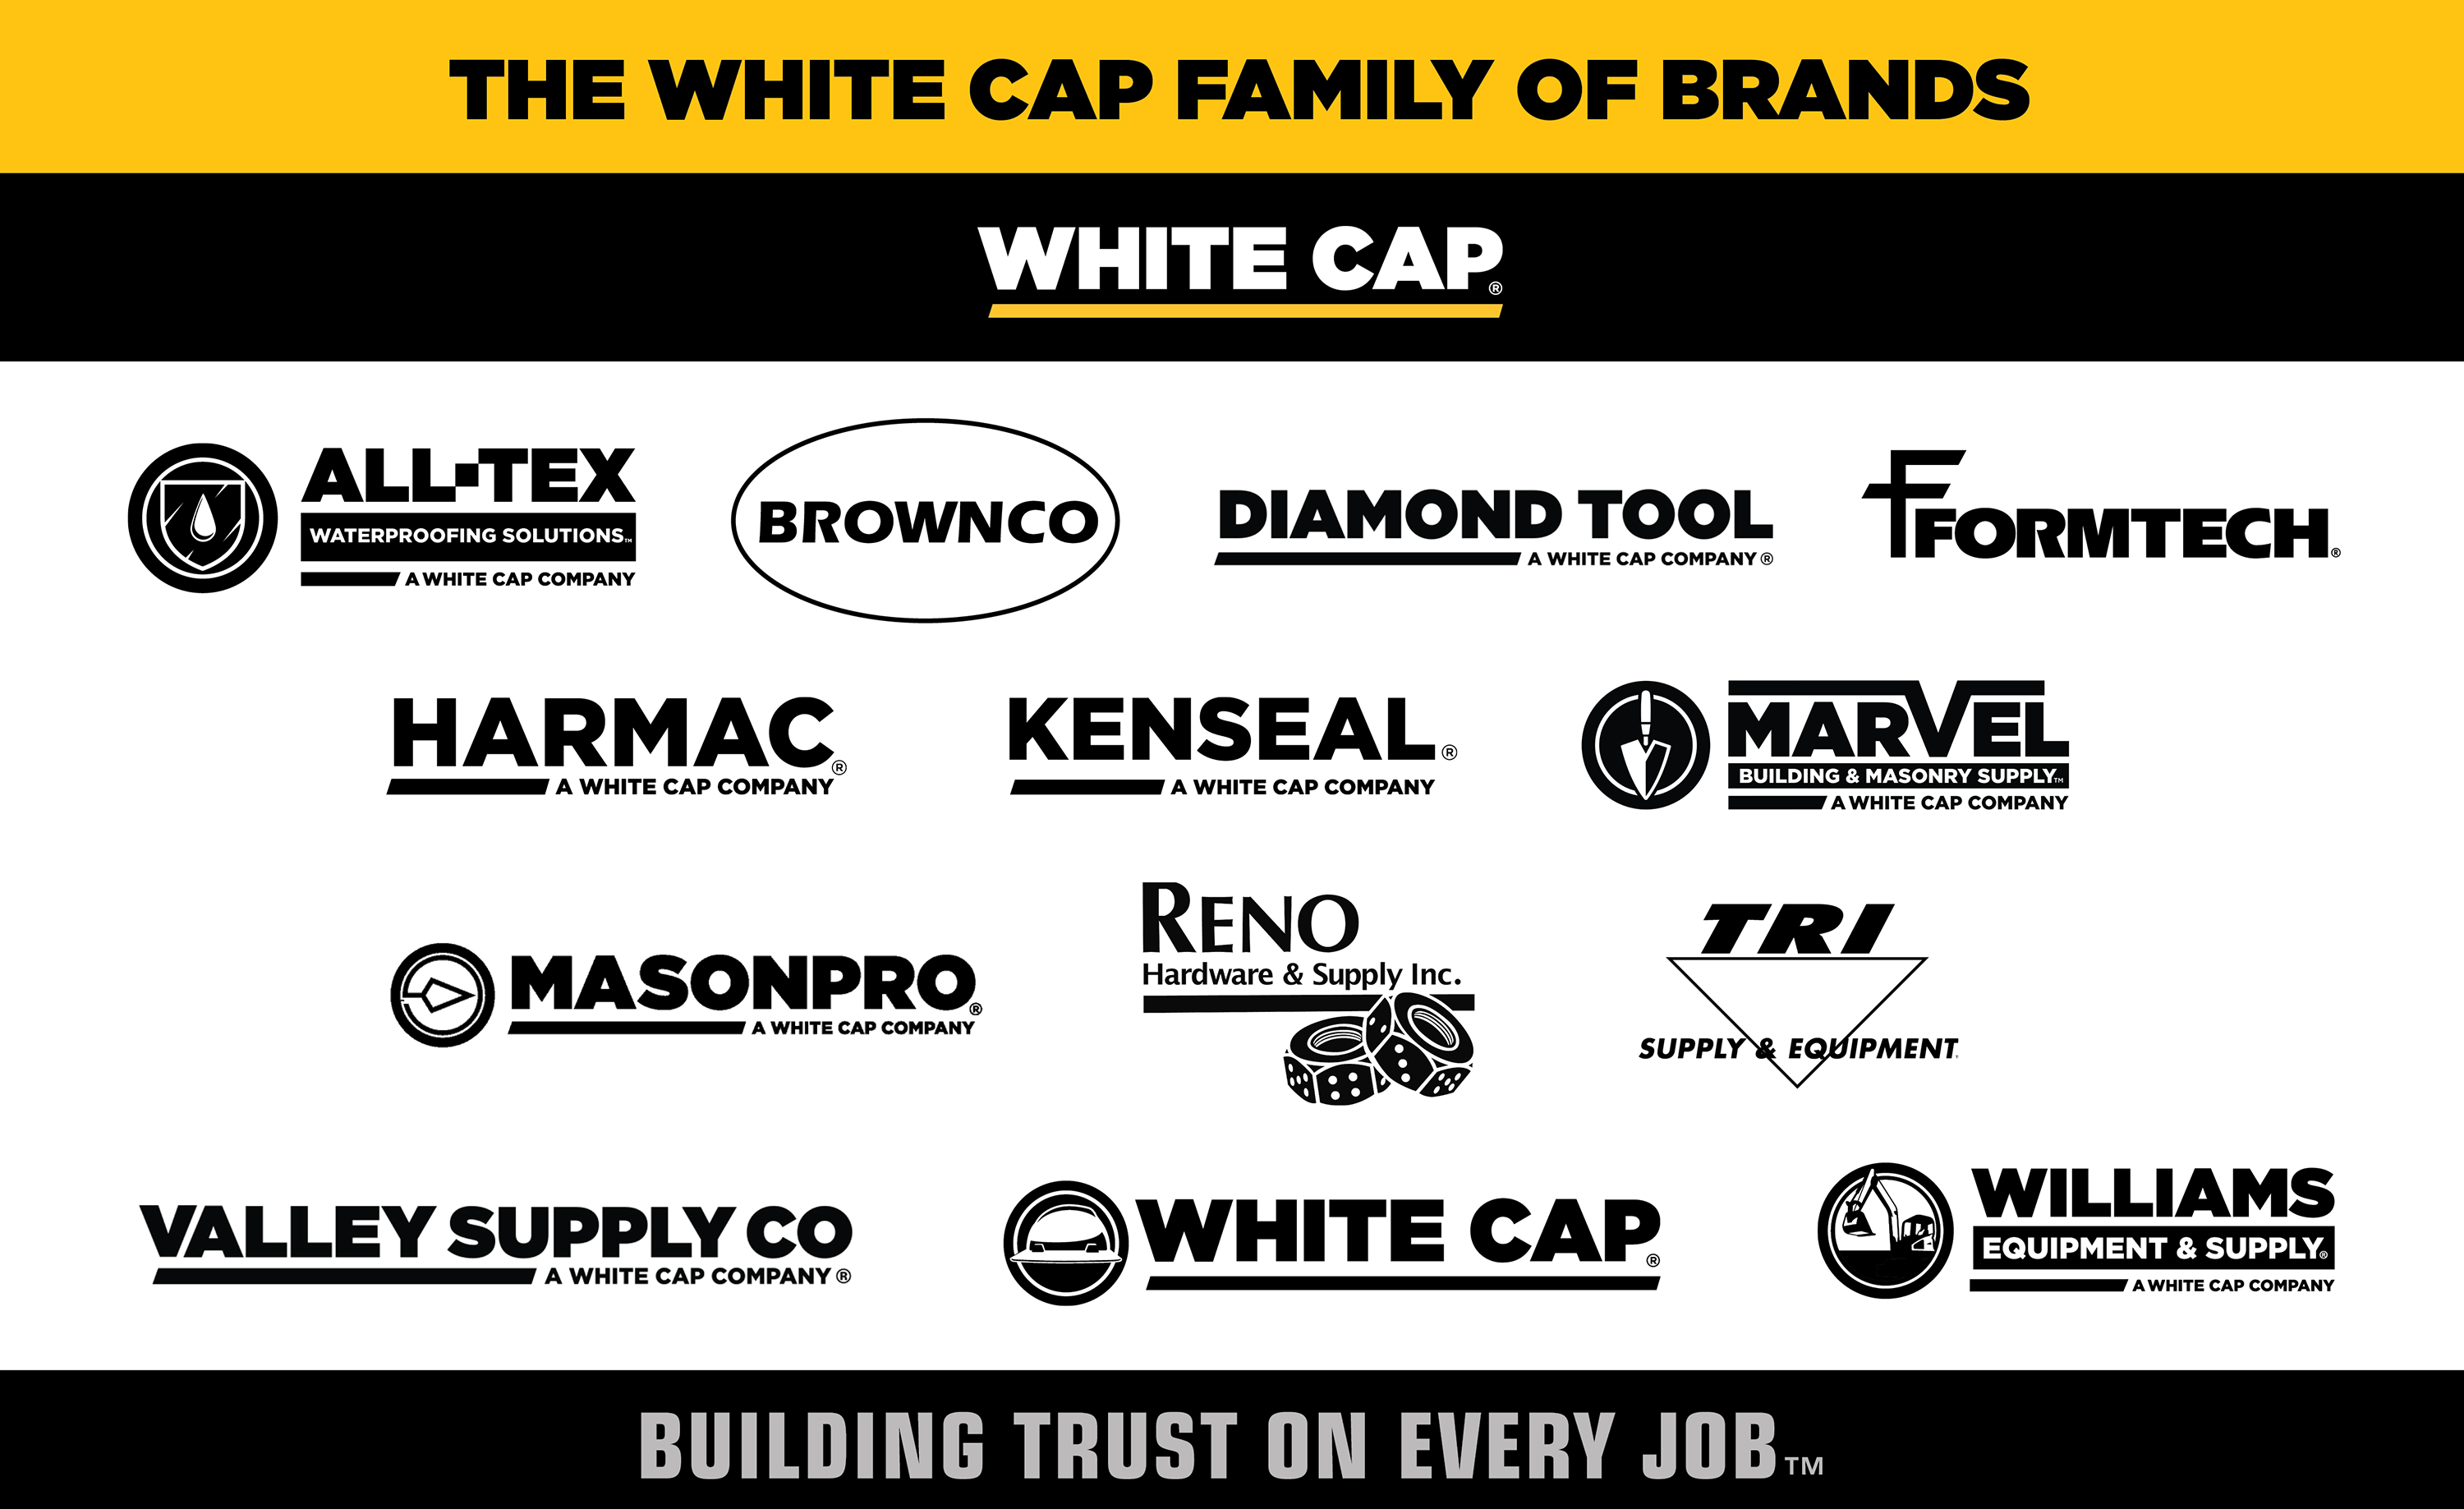 Family of brands image